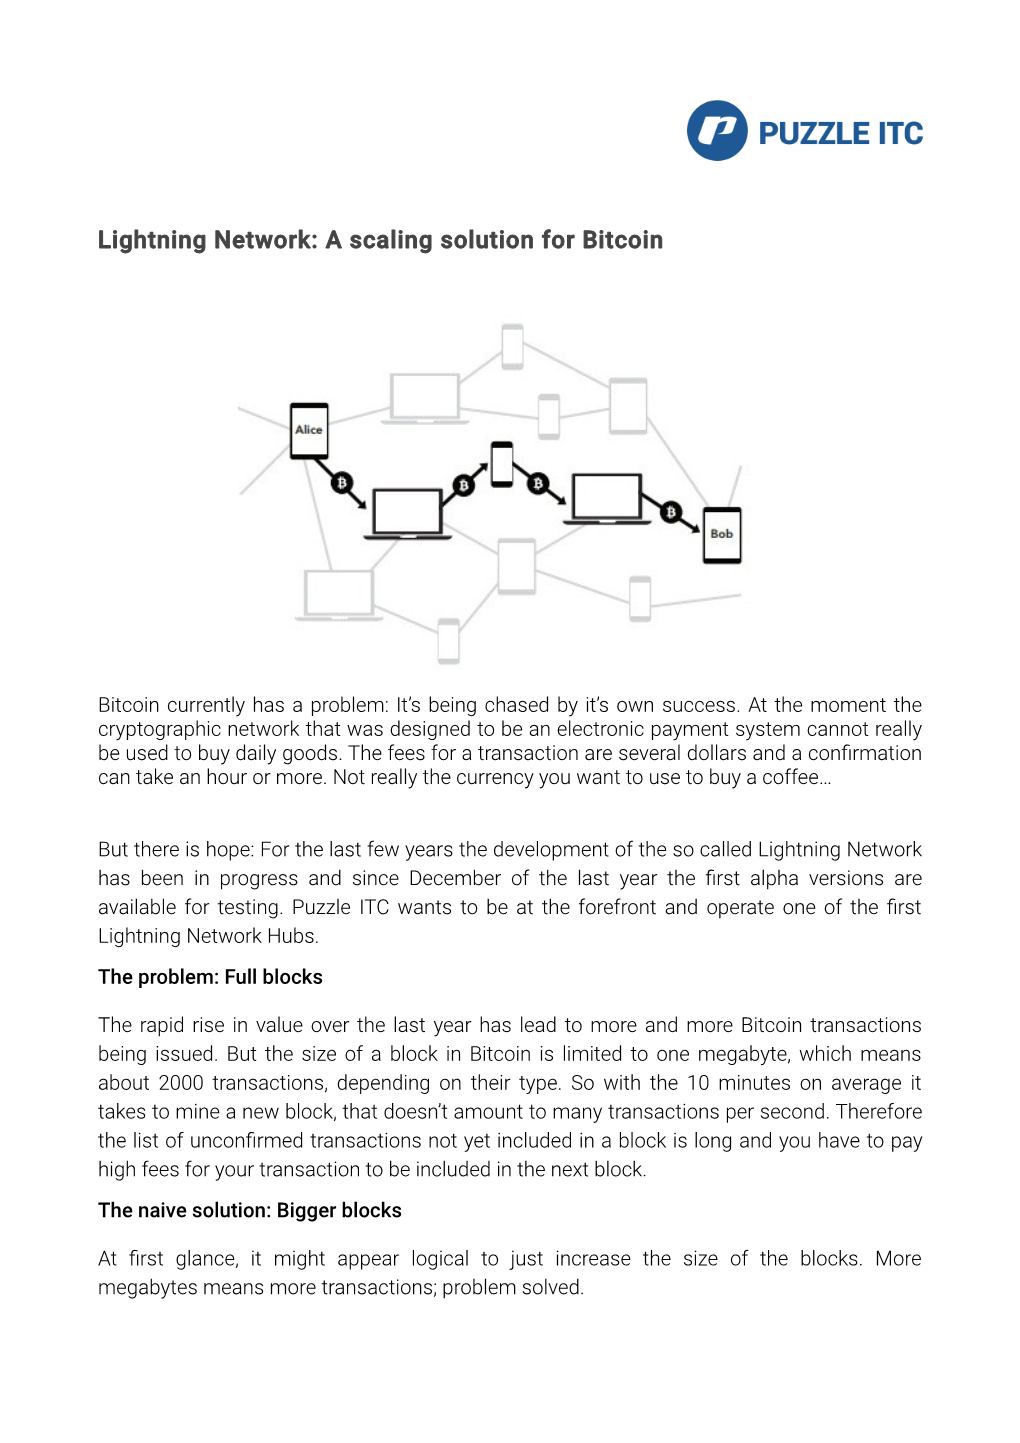 Lightning Network: a Scaling Solution for Bitcoin